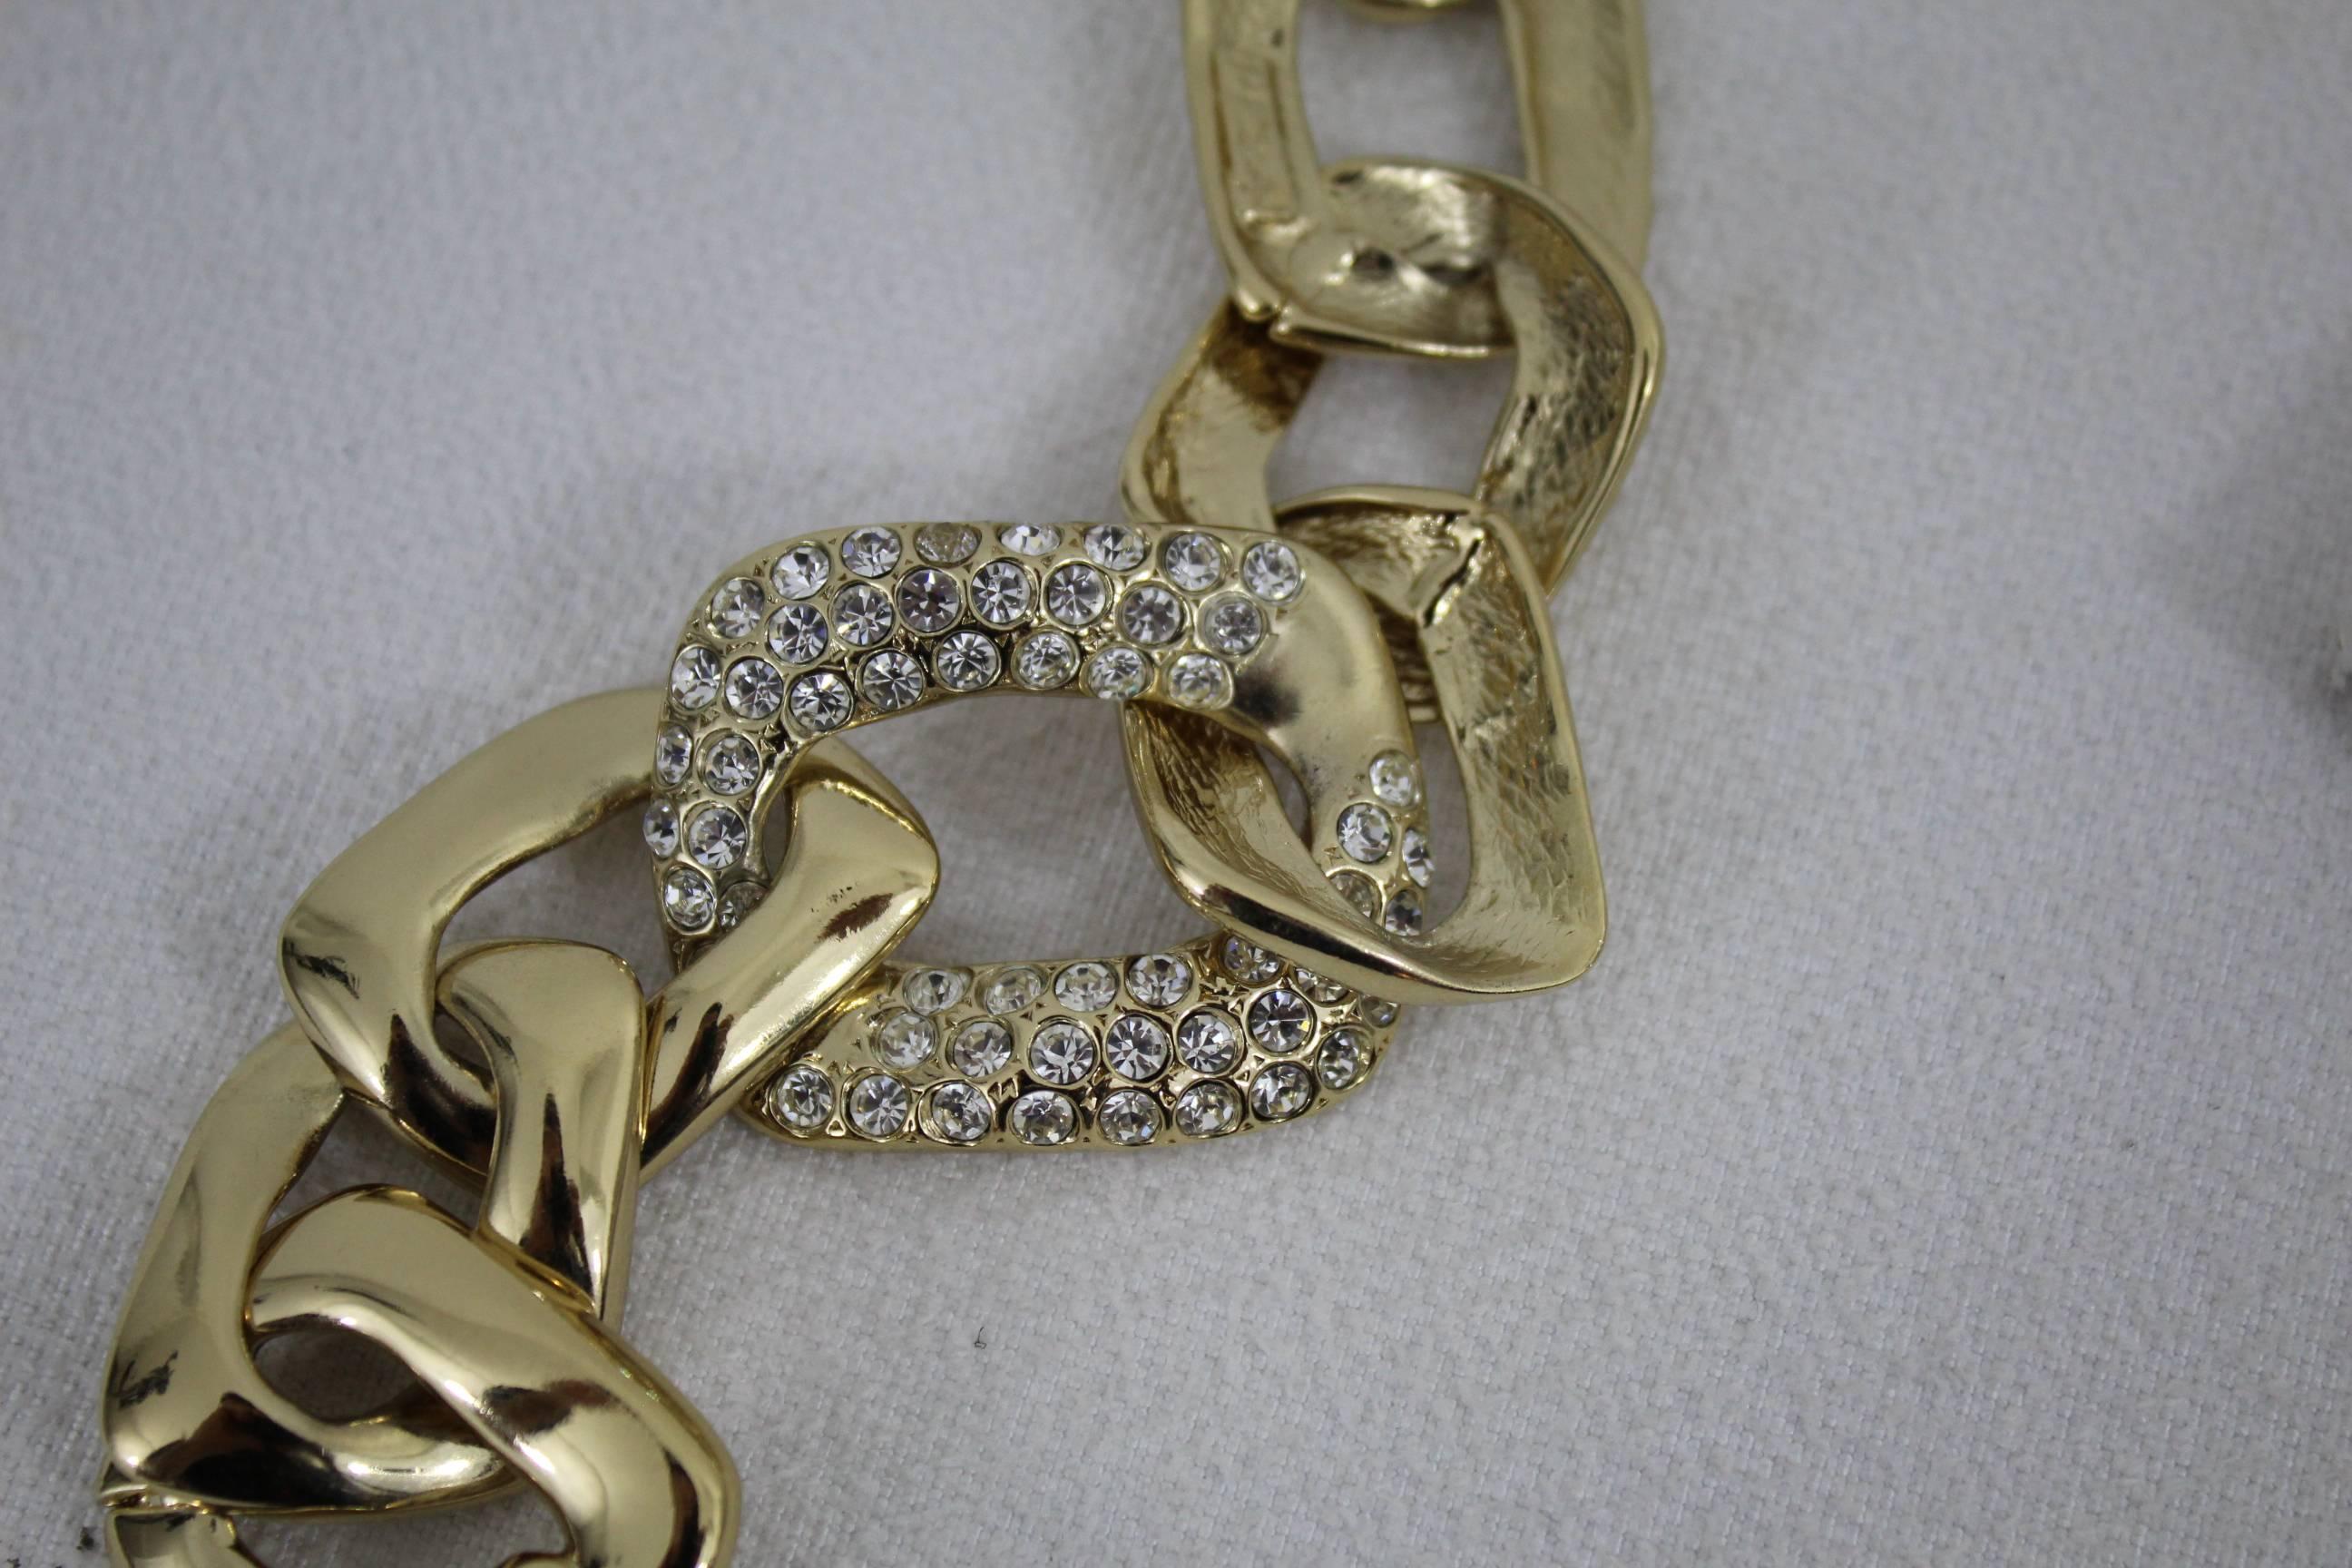 Vintage Yves Saint Laurent Jewlery Set in GOld Plated Metal For Sale 3